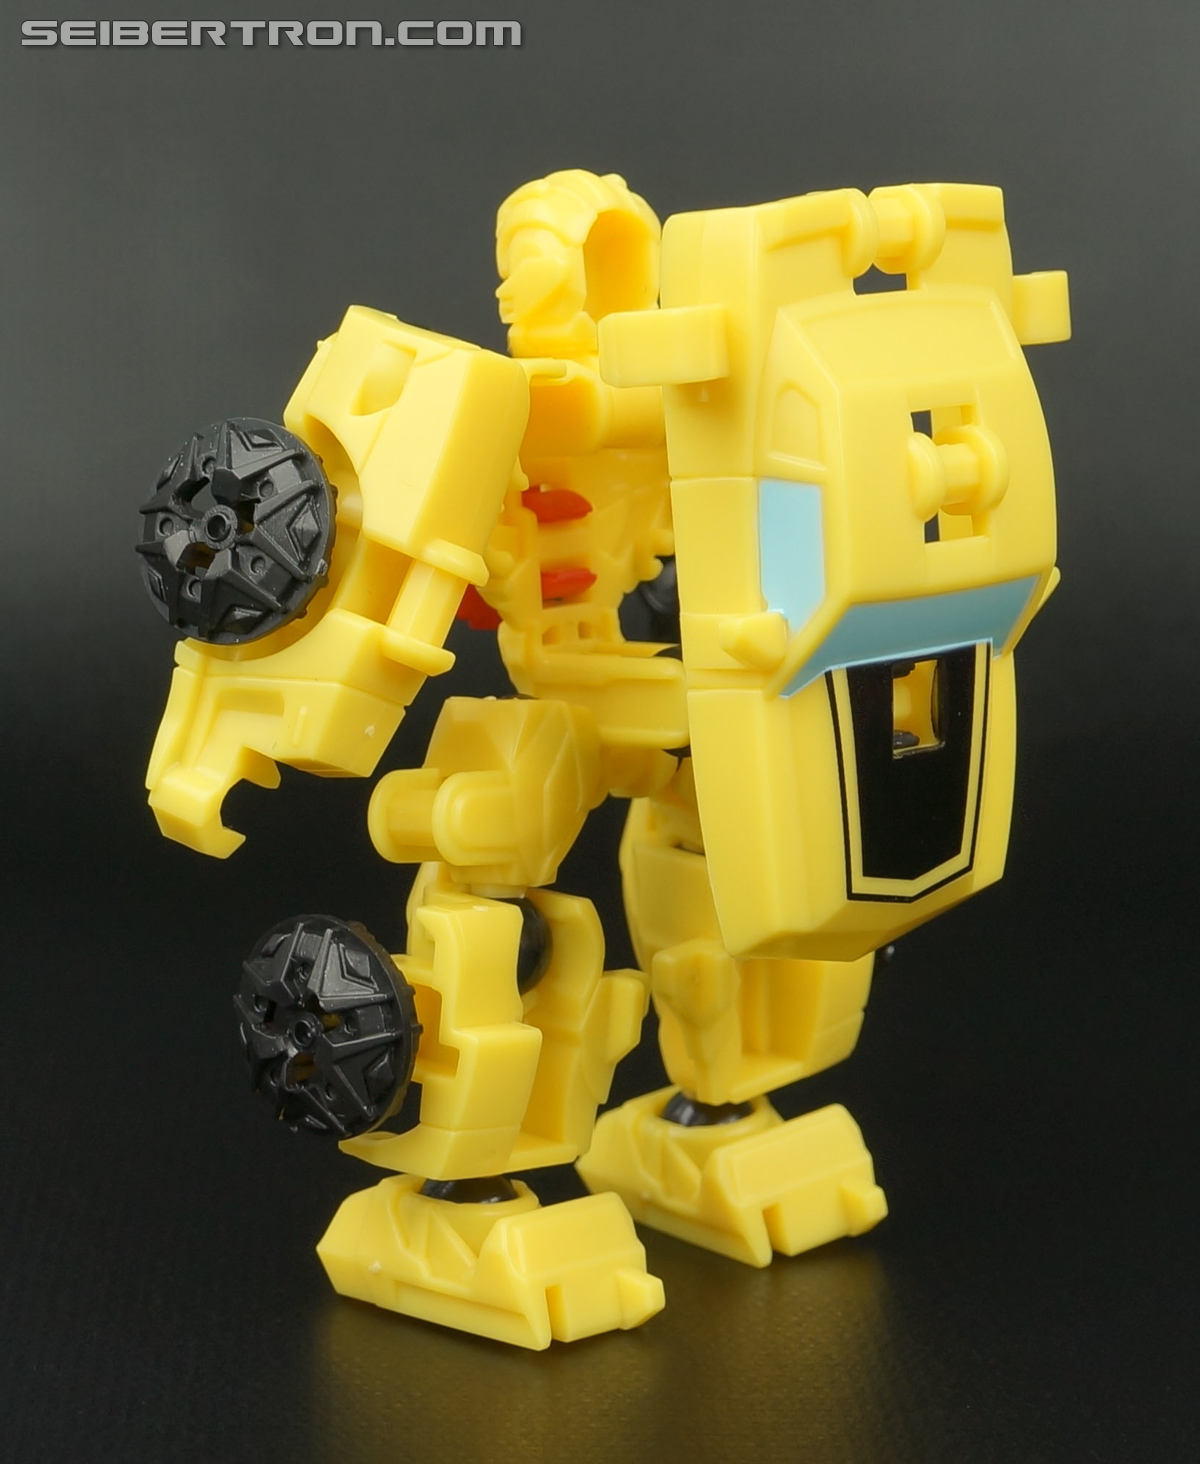 Transformers Age of Extinction: Construct-Bots Bumblebee (Image #54 of 91)